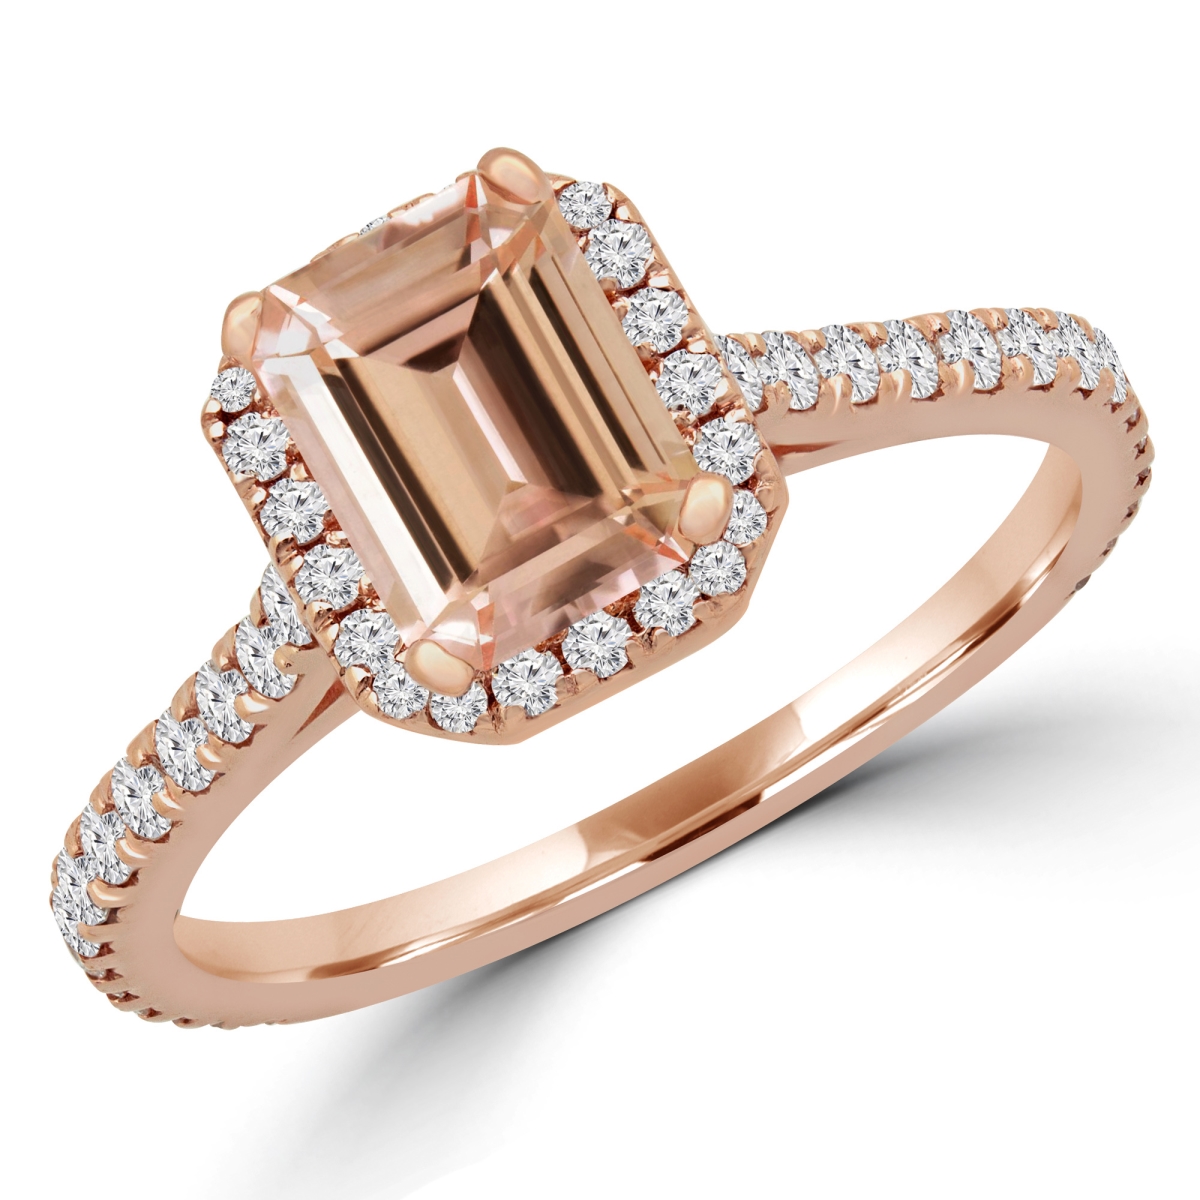 Picture of Majesty Diamonds MD180580-6.5 1.25 CTW Emerald Pink Morganite Halo Engagement Ring in 14K Rose Gold - Size 6.5